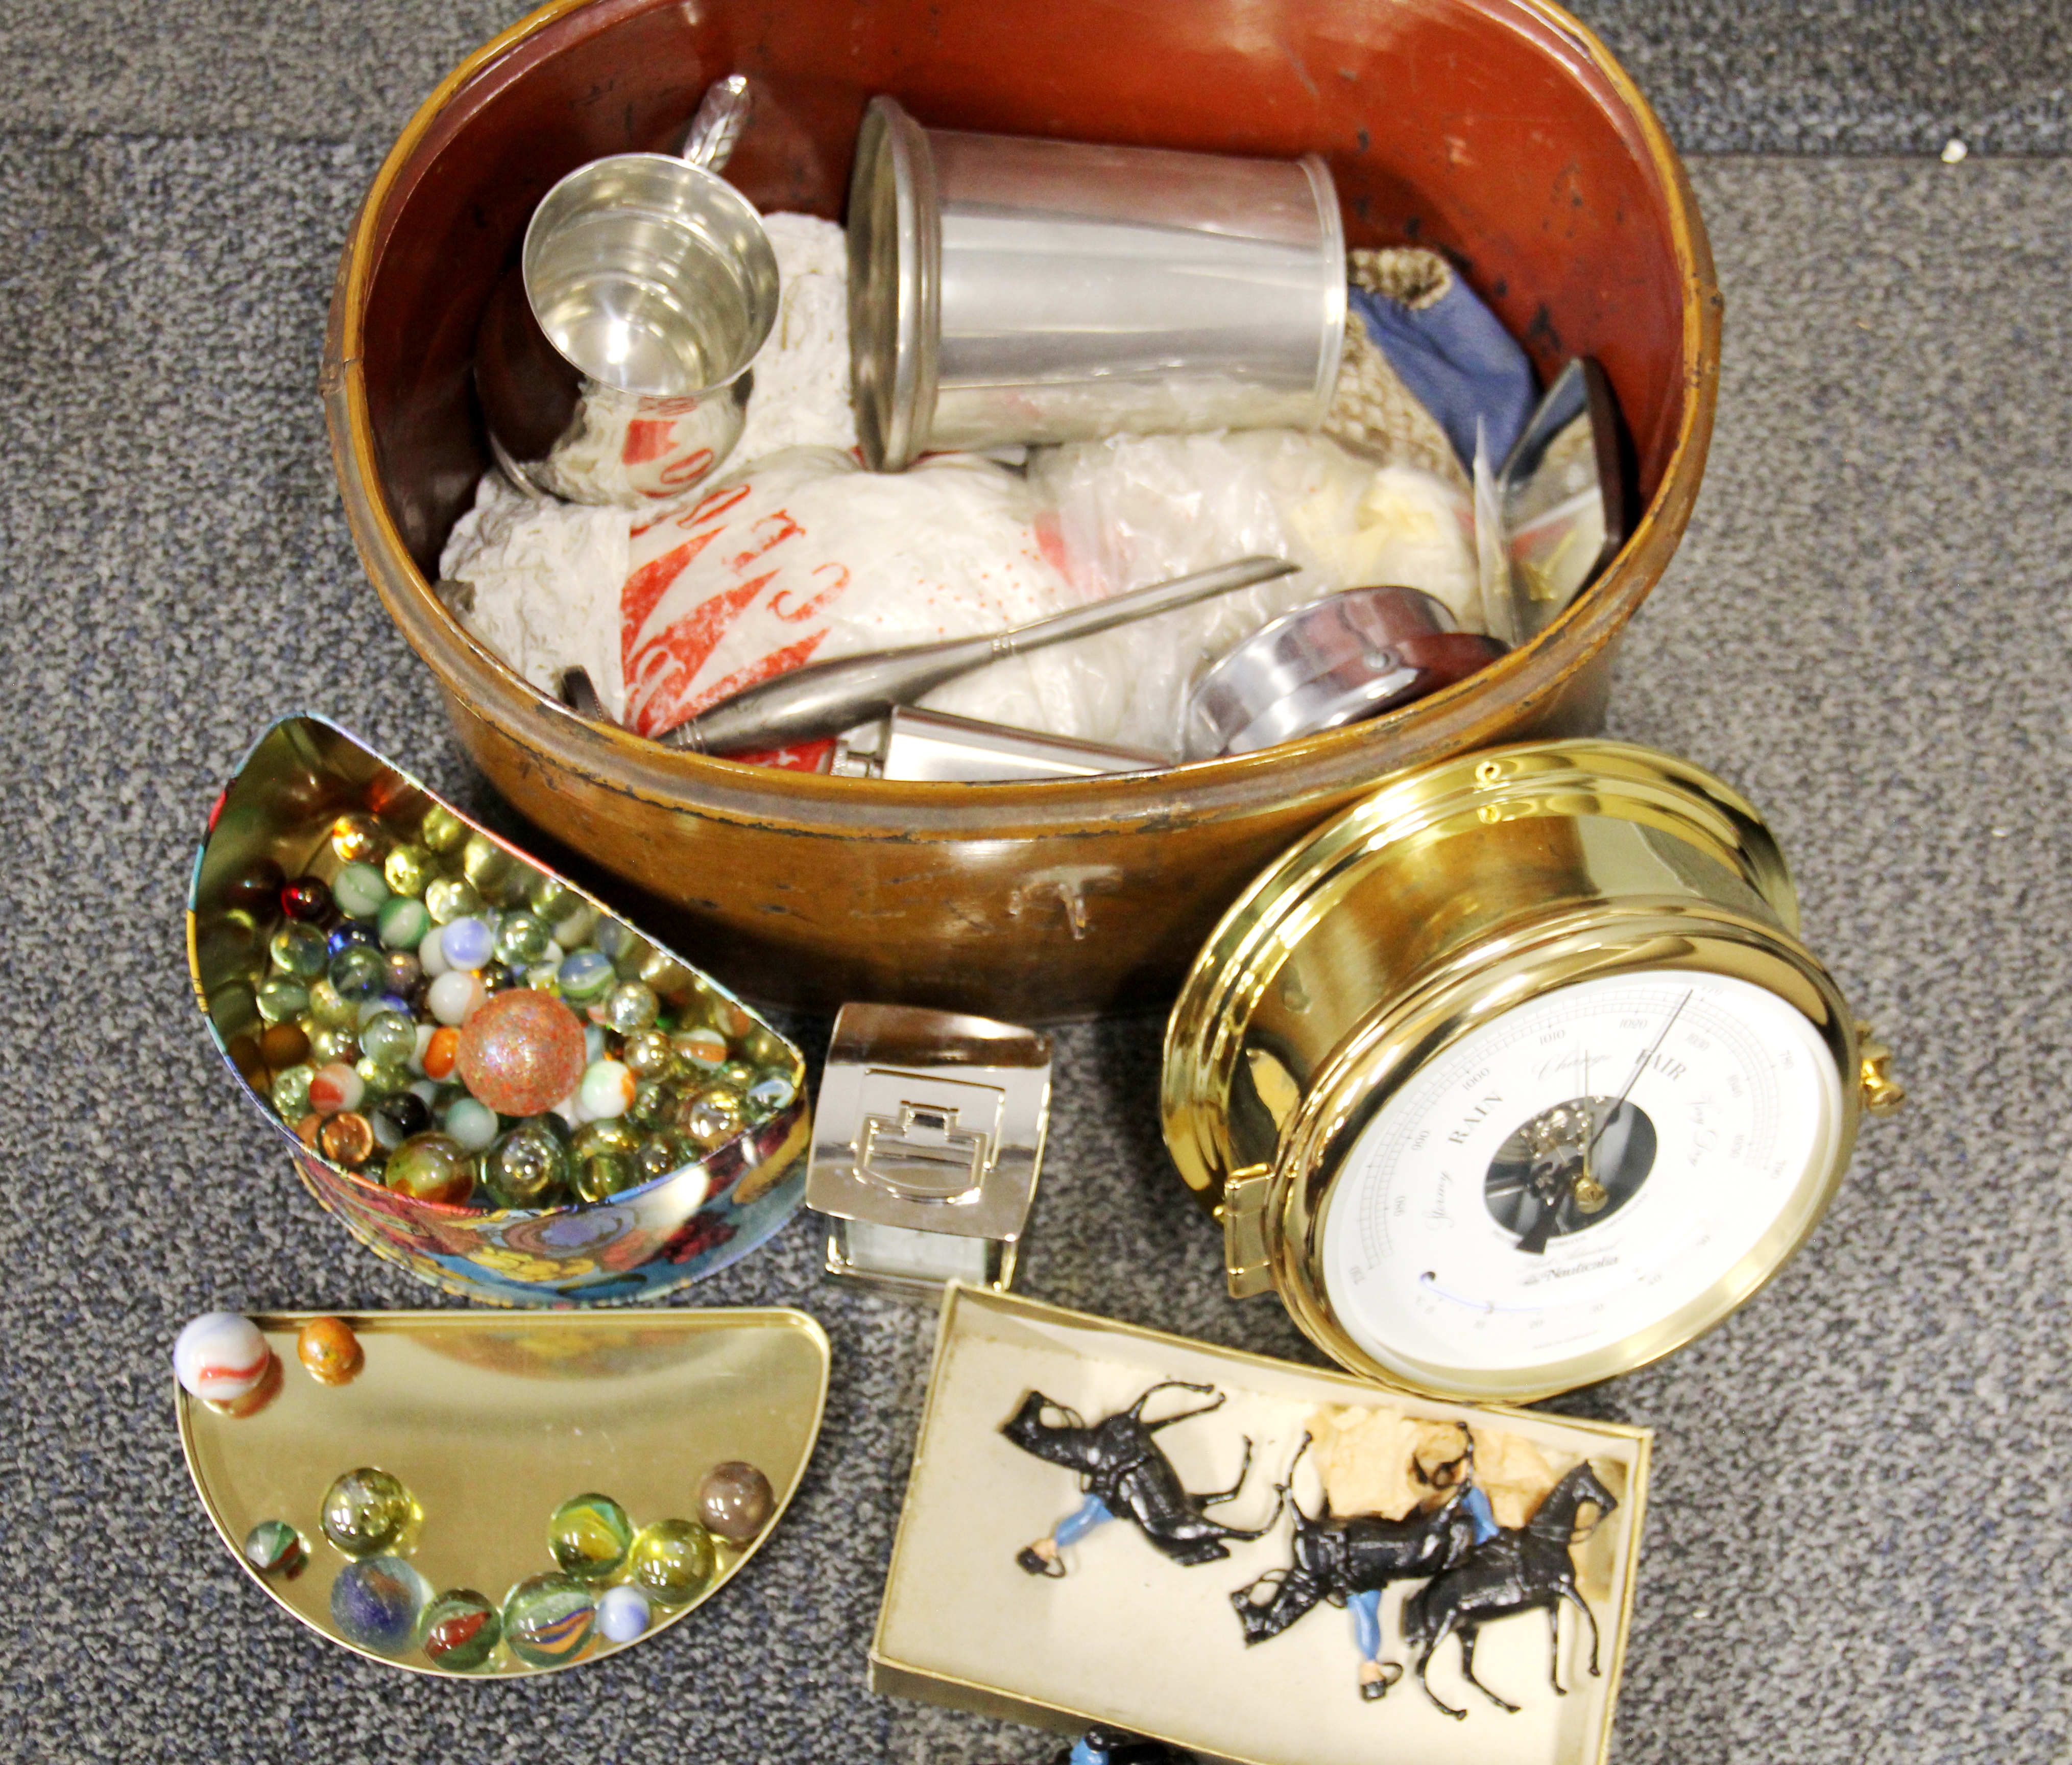 A metal hat box and contents.